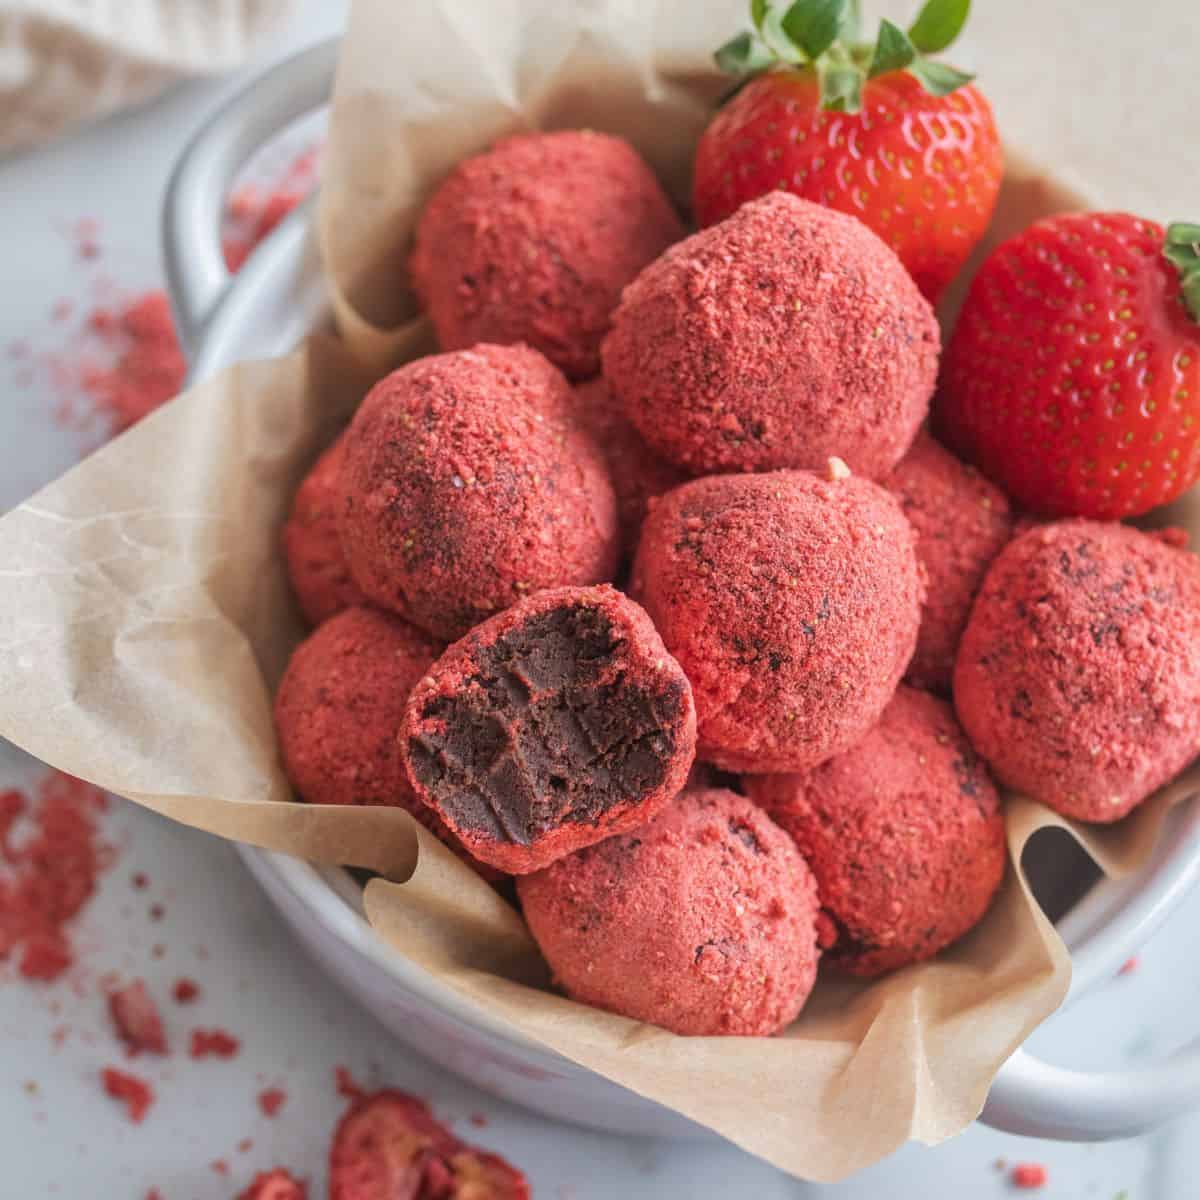 Bowl of chocolate covered strawberry truffles.  One truffle has a a bite taken out of it, showing the dark chocolate interior.